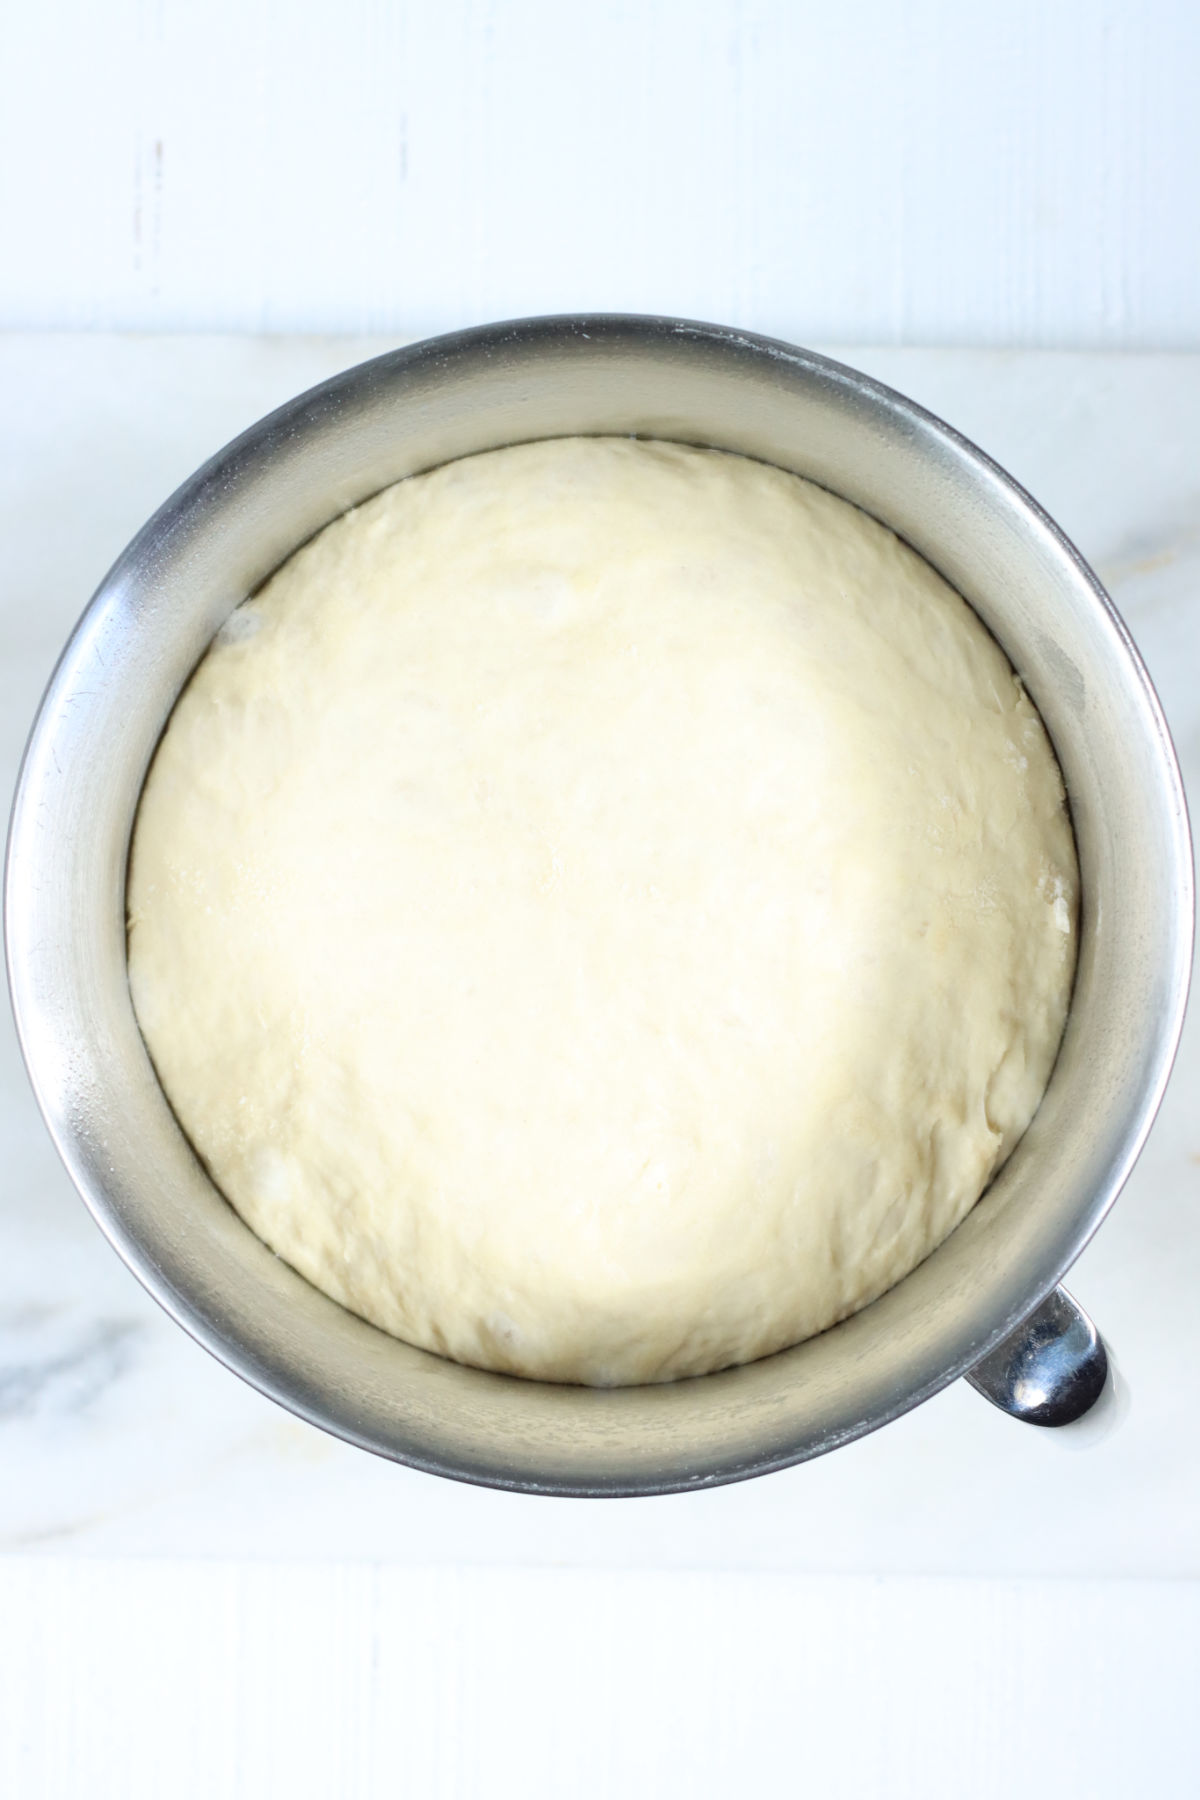 Metal mixing bowl with yeast bread dough rising on white marble.